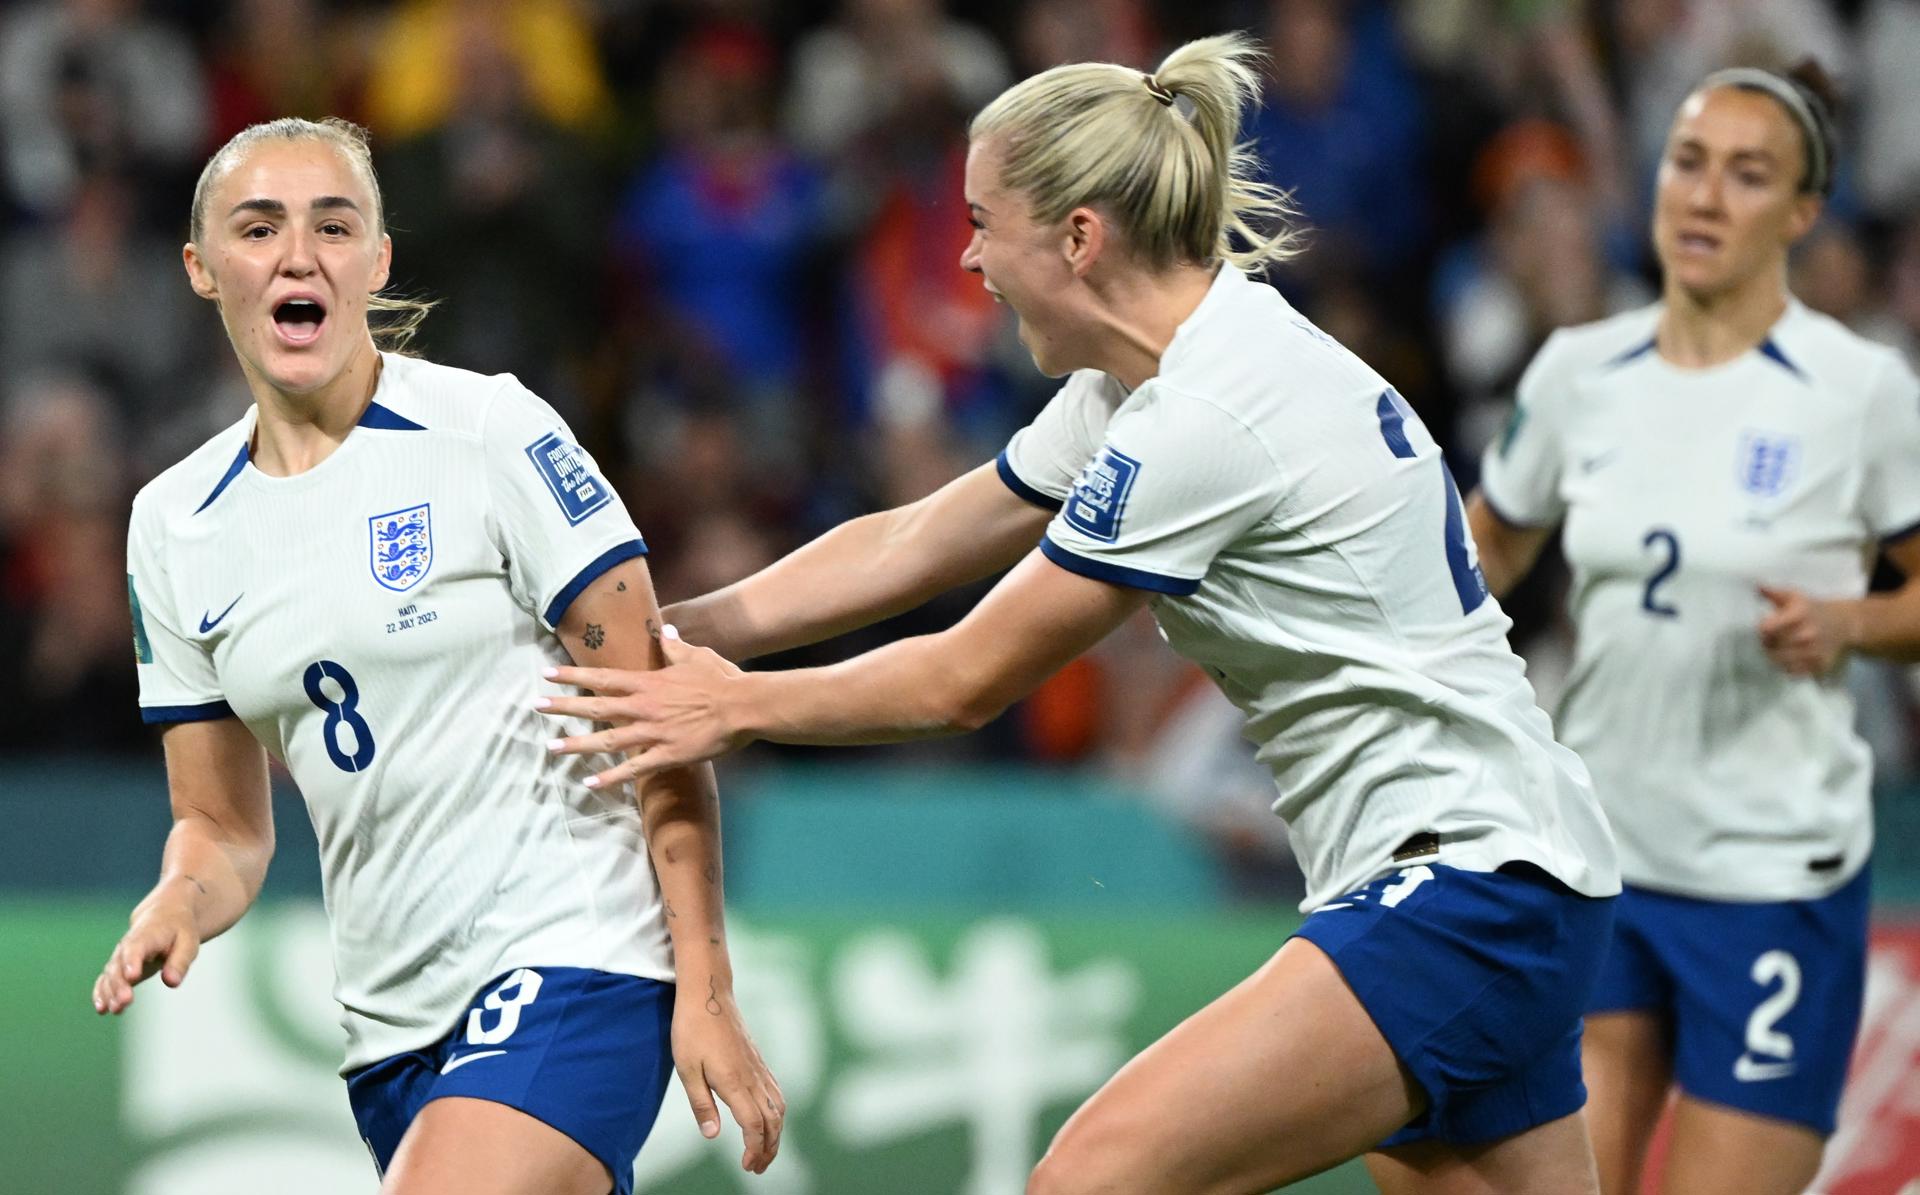 Georgia Stanway (L) of England celebrates scoring a goal with Alessia Russo during the FIFA Women's World Cup 2023 soccer match between England and Haiti at Brisbane Stadium in Brisbane, Australia, 22 July 2022. EFE/EPA/DARREN ENGLAND AUSTRALIA AND NEW ZEALAND OUT